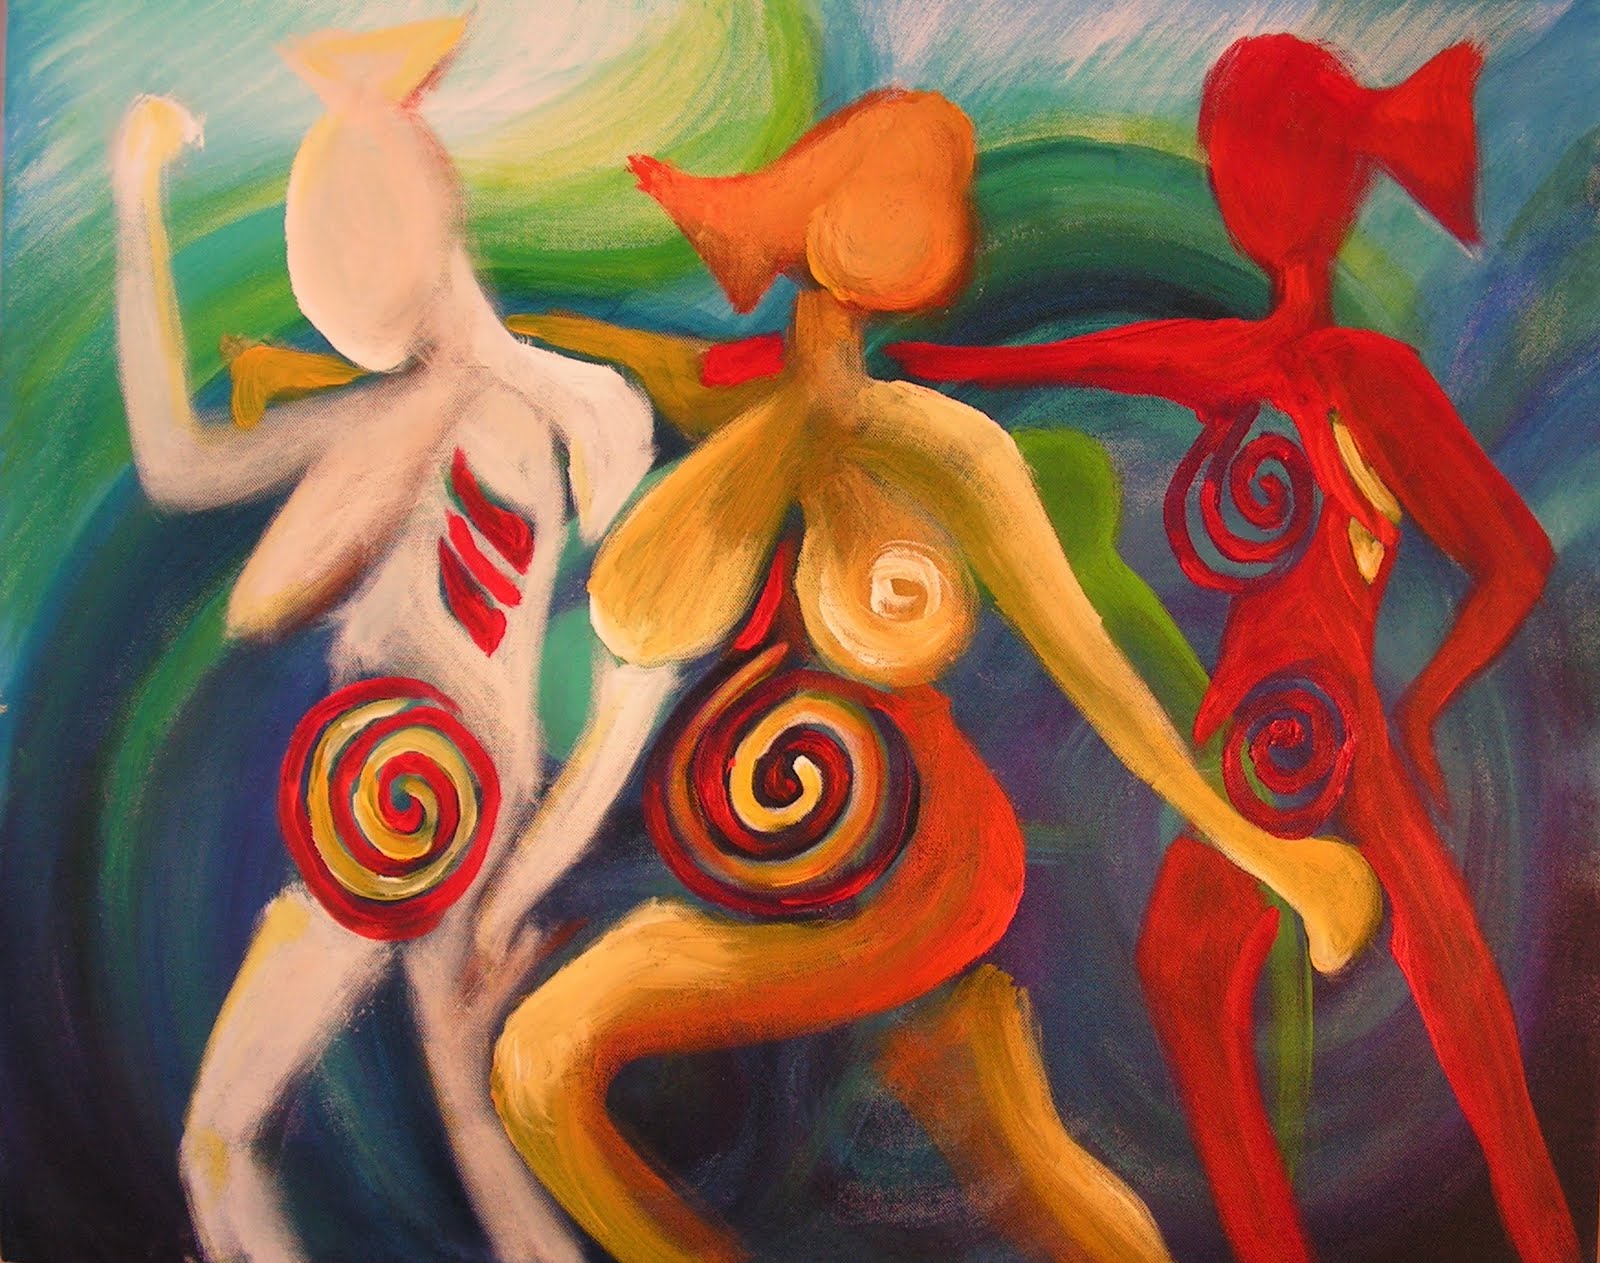 [SISTERS+acrylic+on+gallery+wrapped+canvas,+24''x+30''.jpg]